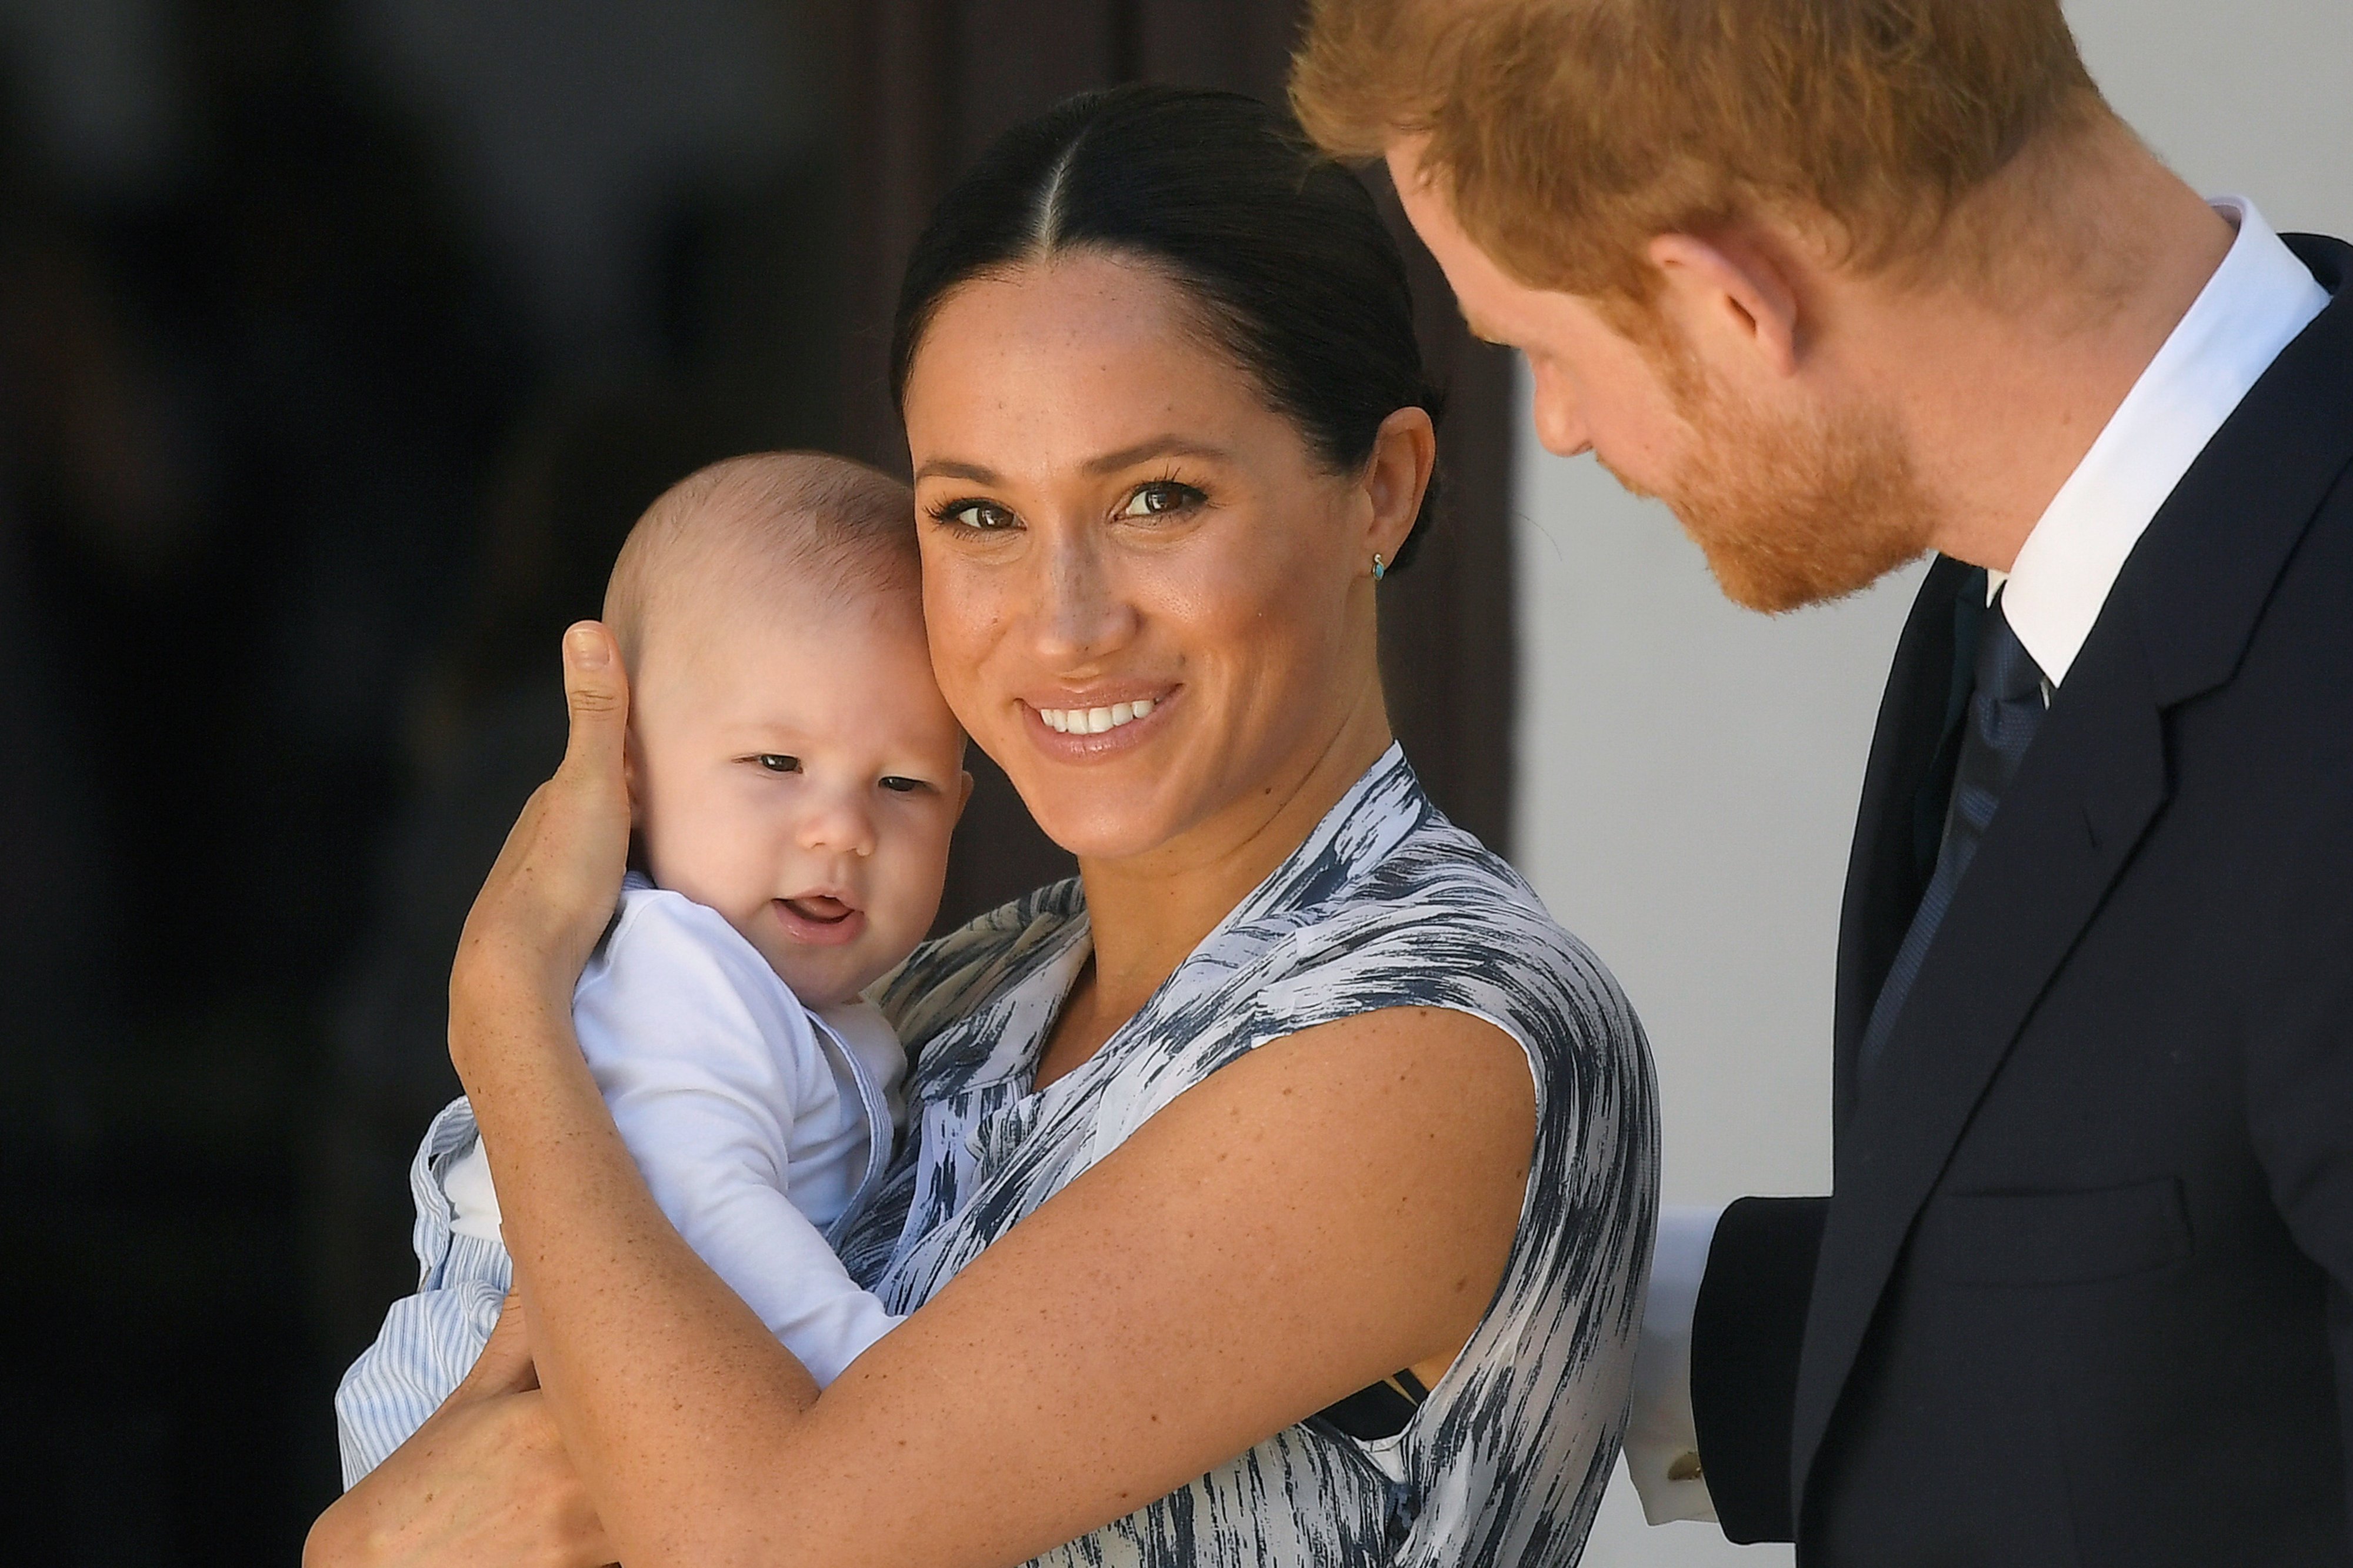 Prince Harry and Meghan Markle with their son Archie on September 25, 2019, in Cape Town, South Africa. | Photo: Getty Images